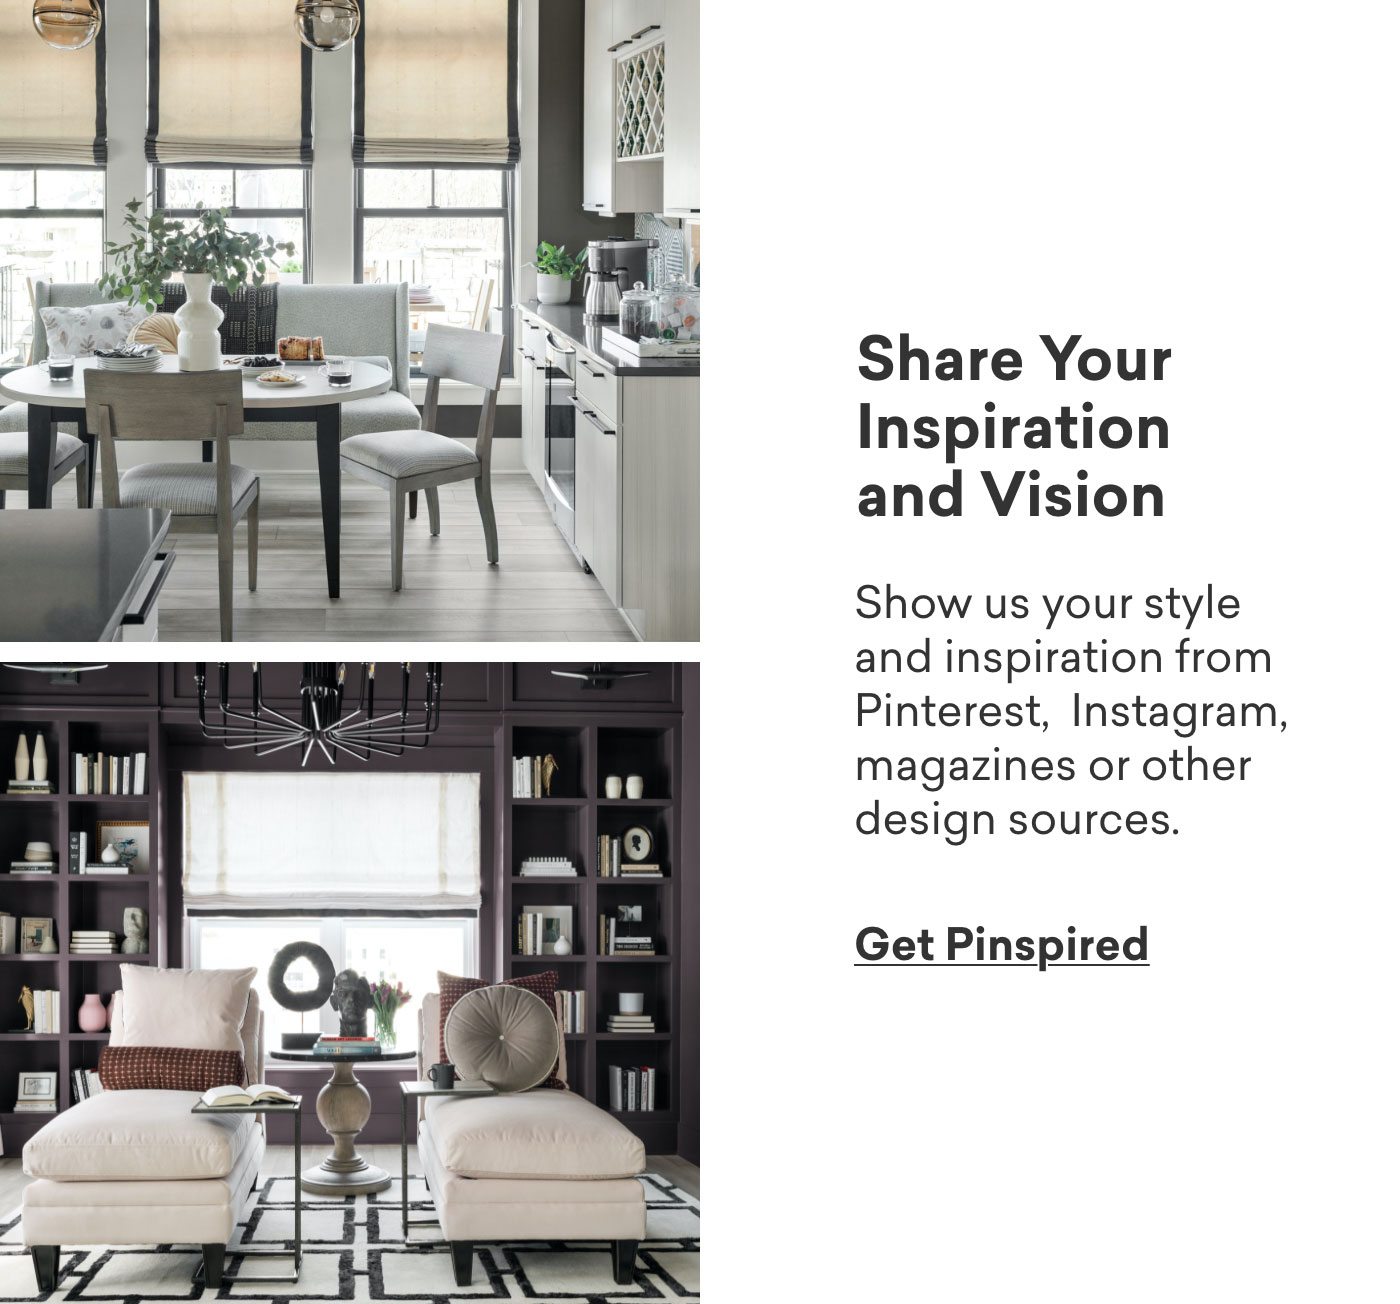 Share your inspiration and vision. Show us your style and inspiration from Pinterest, Instagram or other design sources. Gen Pinspired.